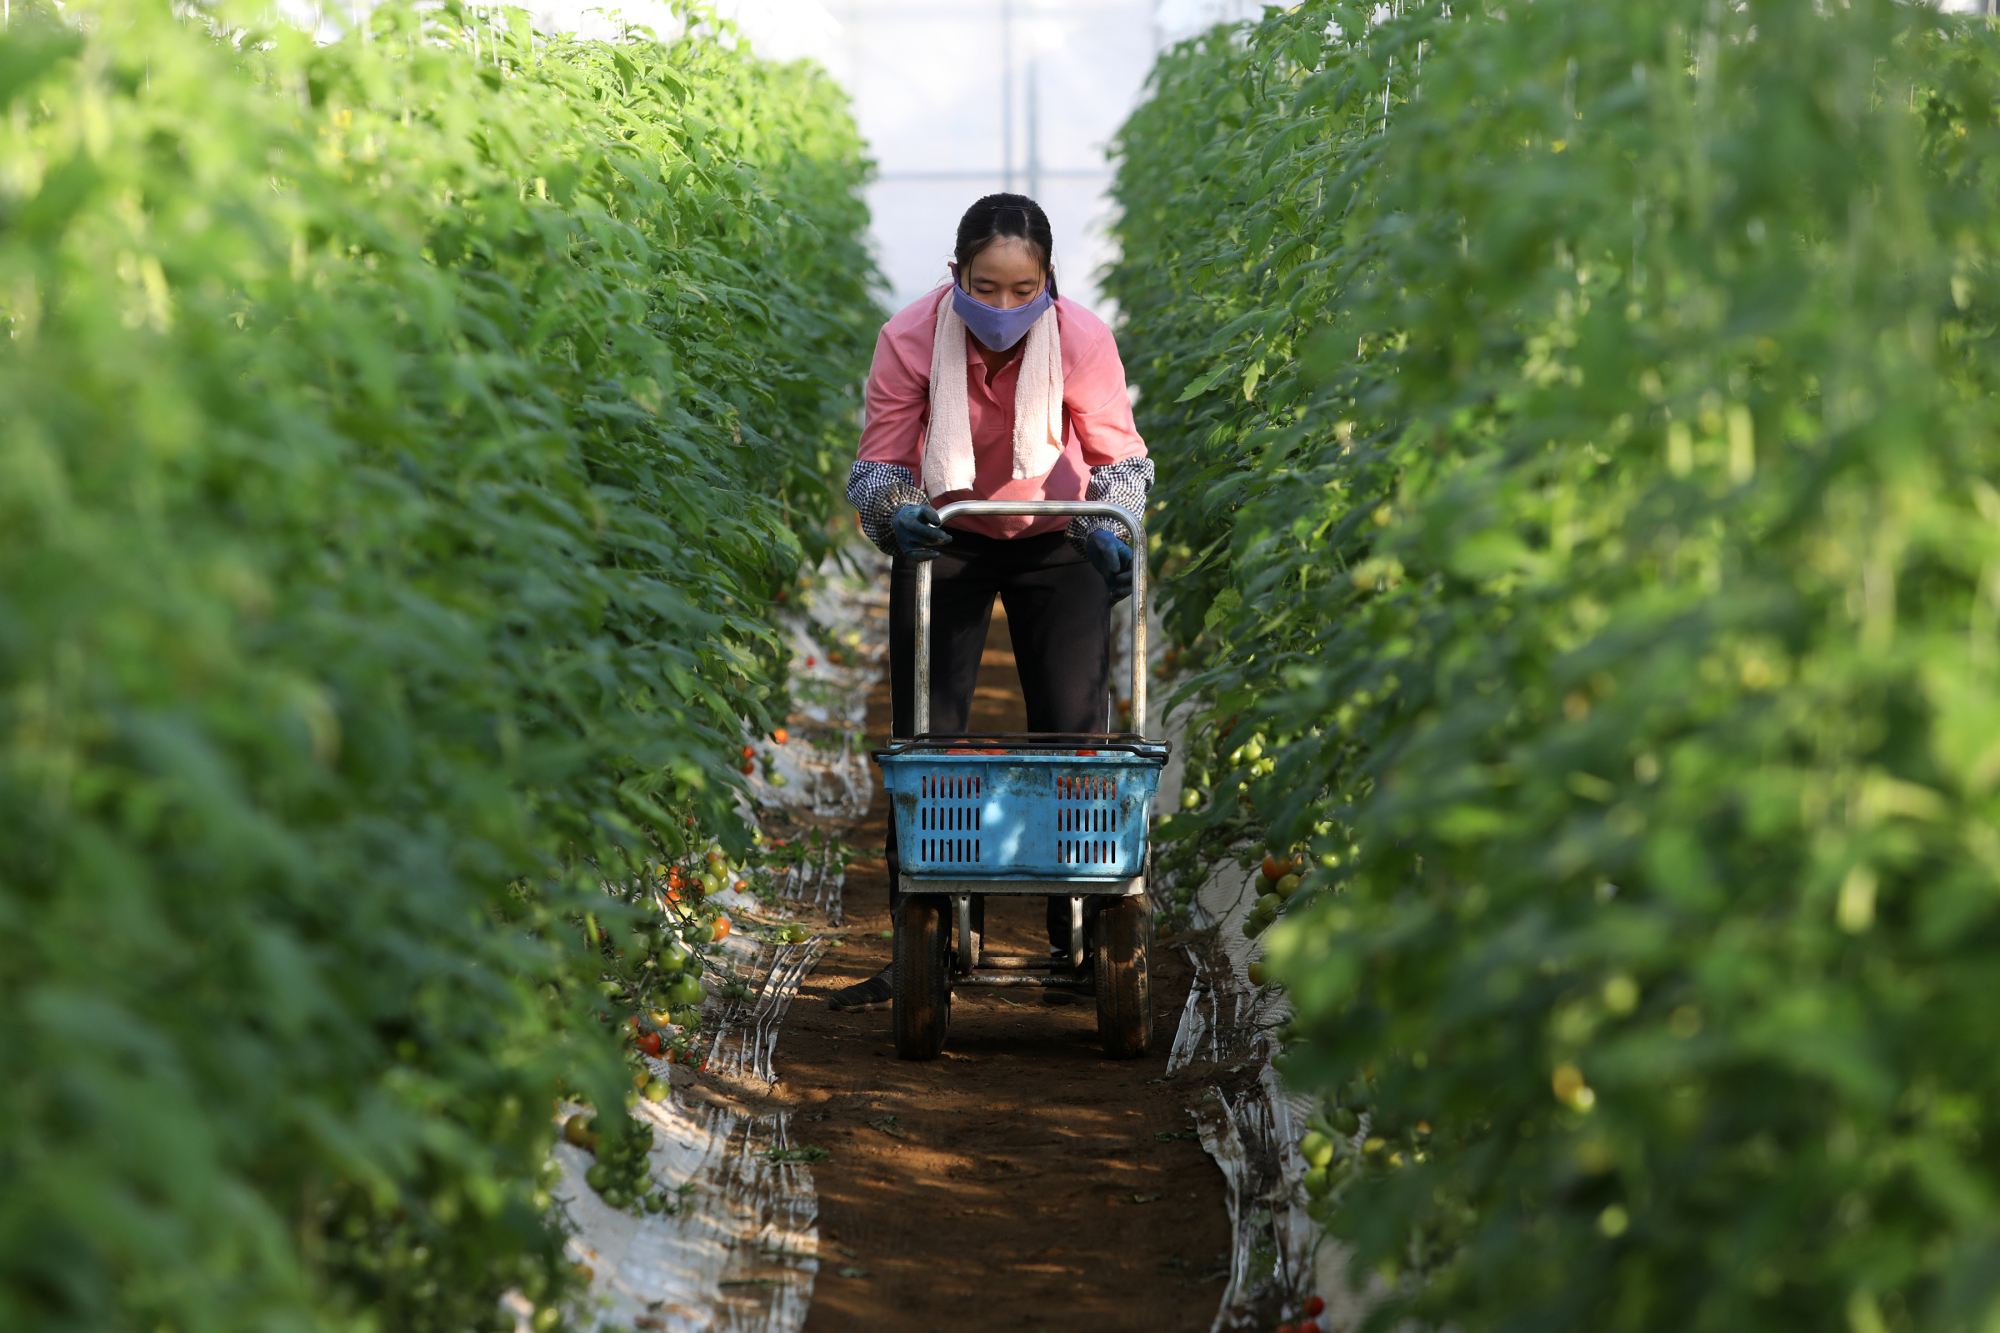 A Vietnamese worker harvests tomatoes in Asahi, Chiba Prefecture, on Dec. 16. Foreign residents now account for about 2 percent of Japan's population and the number will increase following a revision of the immigration law. | BLOOMBERG